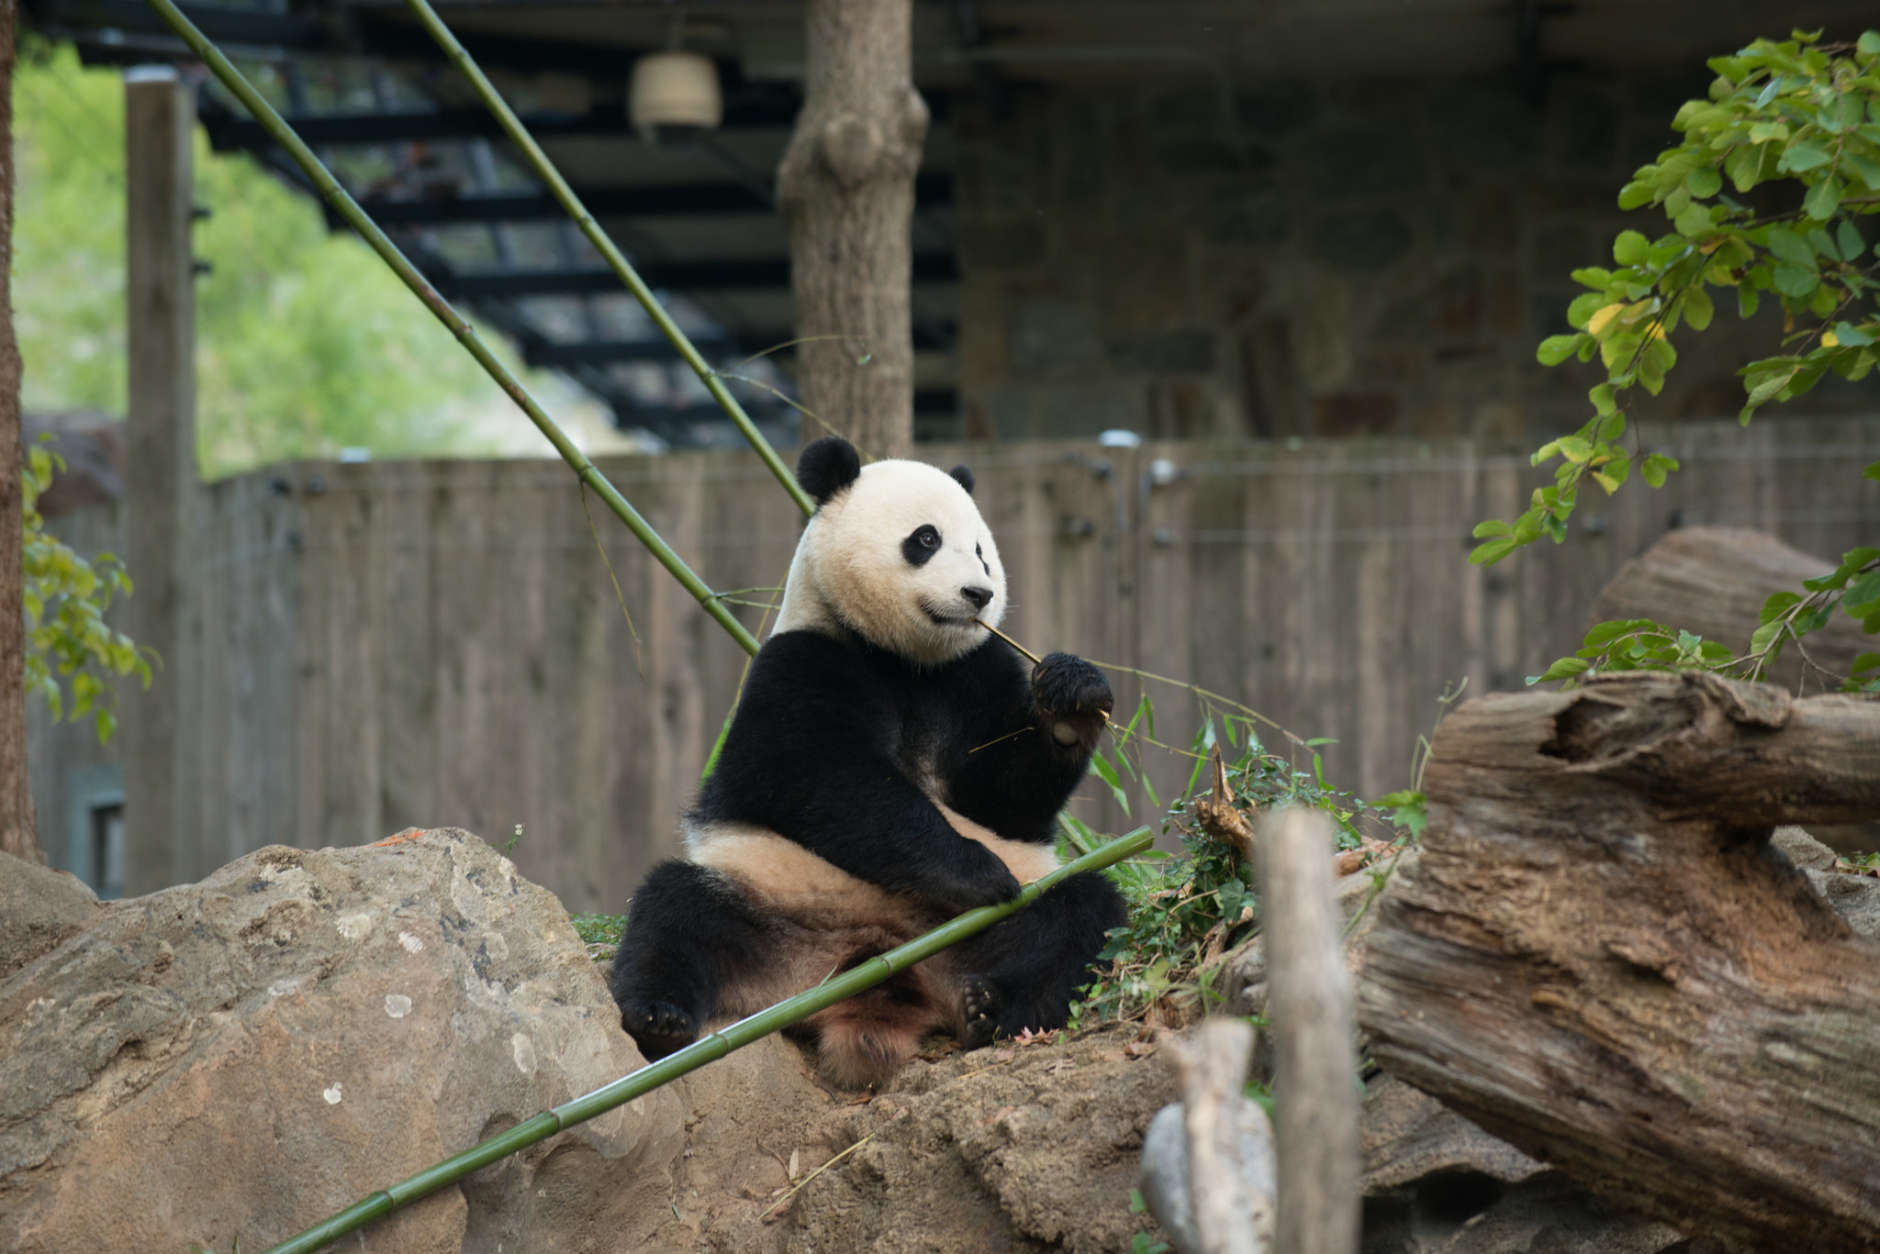 Bao Bao's keepers will have her favorite snacks available during the 16-hour flight to China. (Courtesy Smithsonian National Zoo)